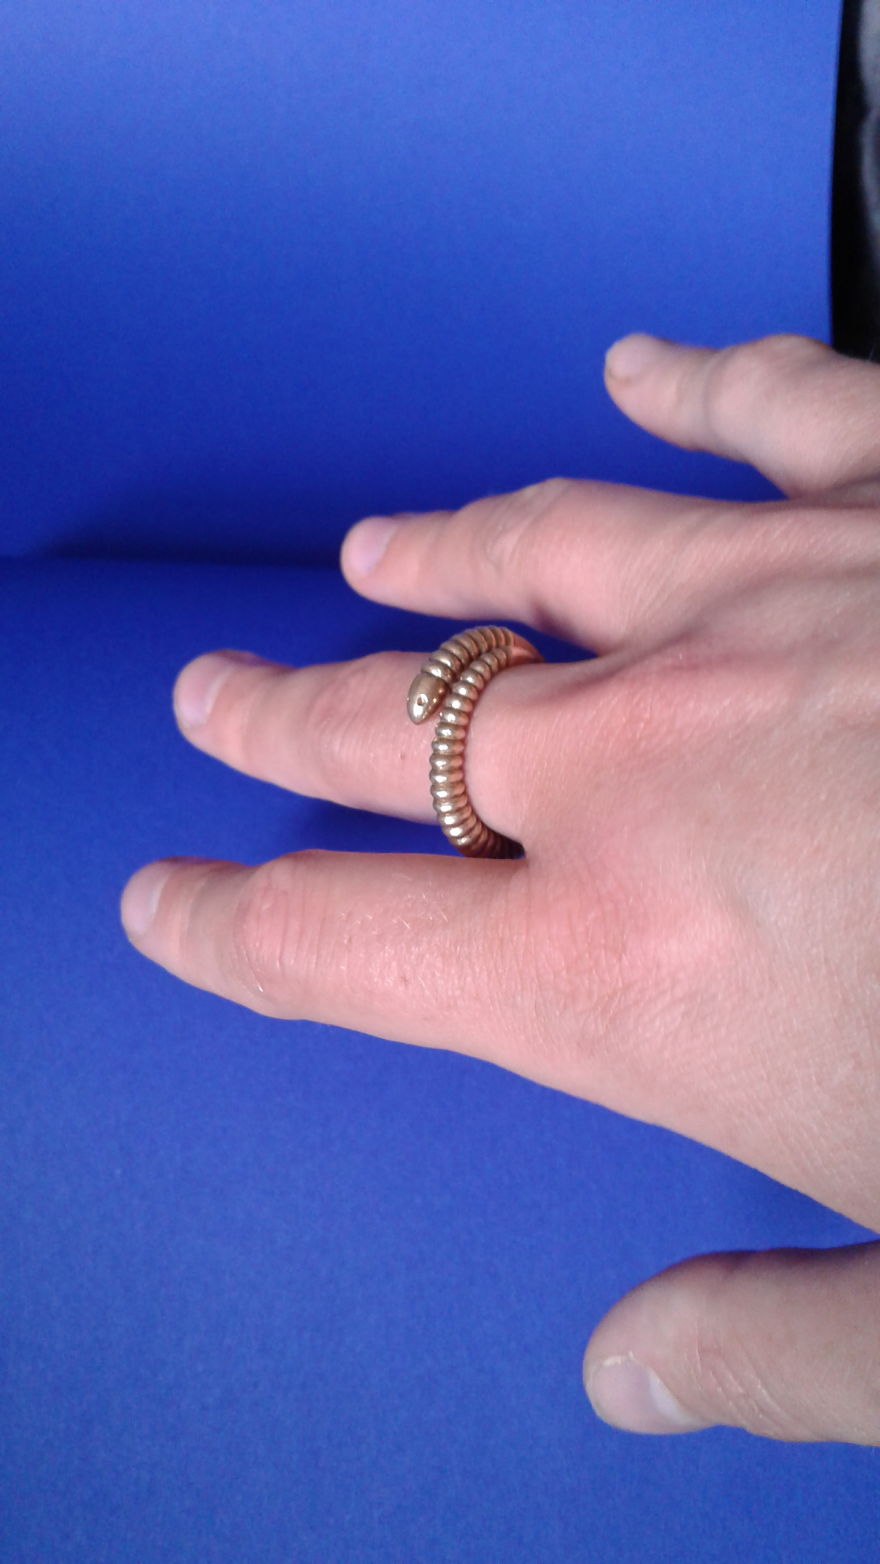 My 3d Printed Jewellery Collection Tells The Story Of A Lonely Worm Who Meets His Soil Mate...